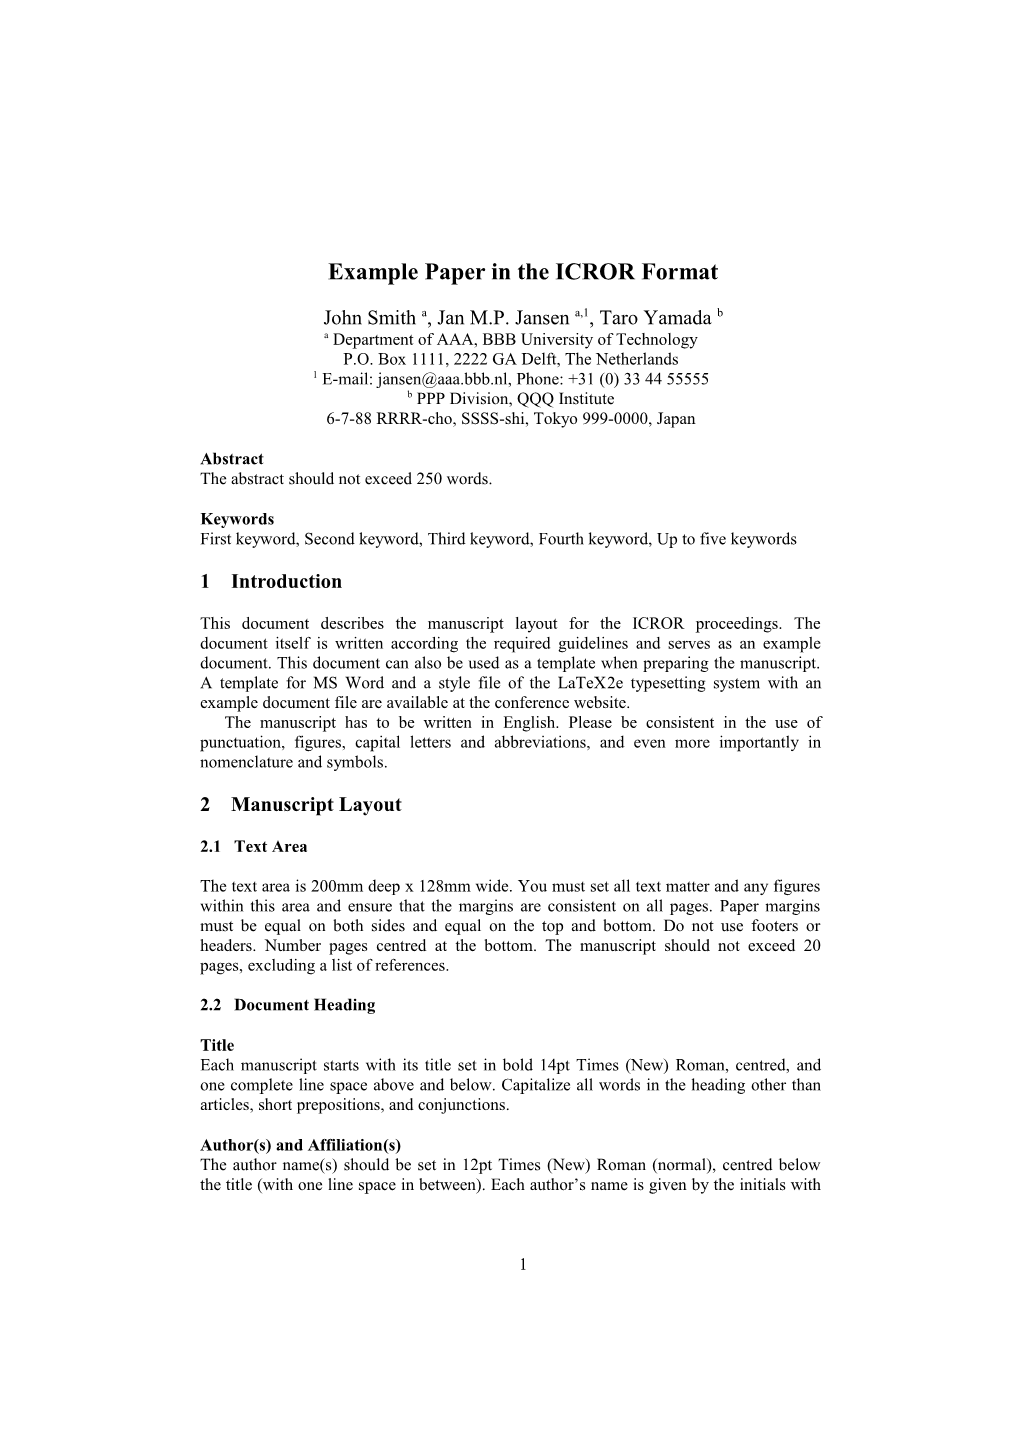 Example Paper in the ICROR Format